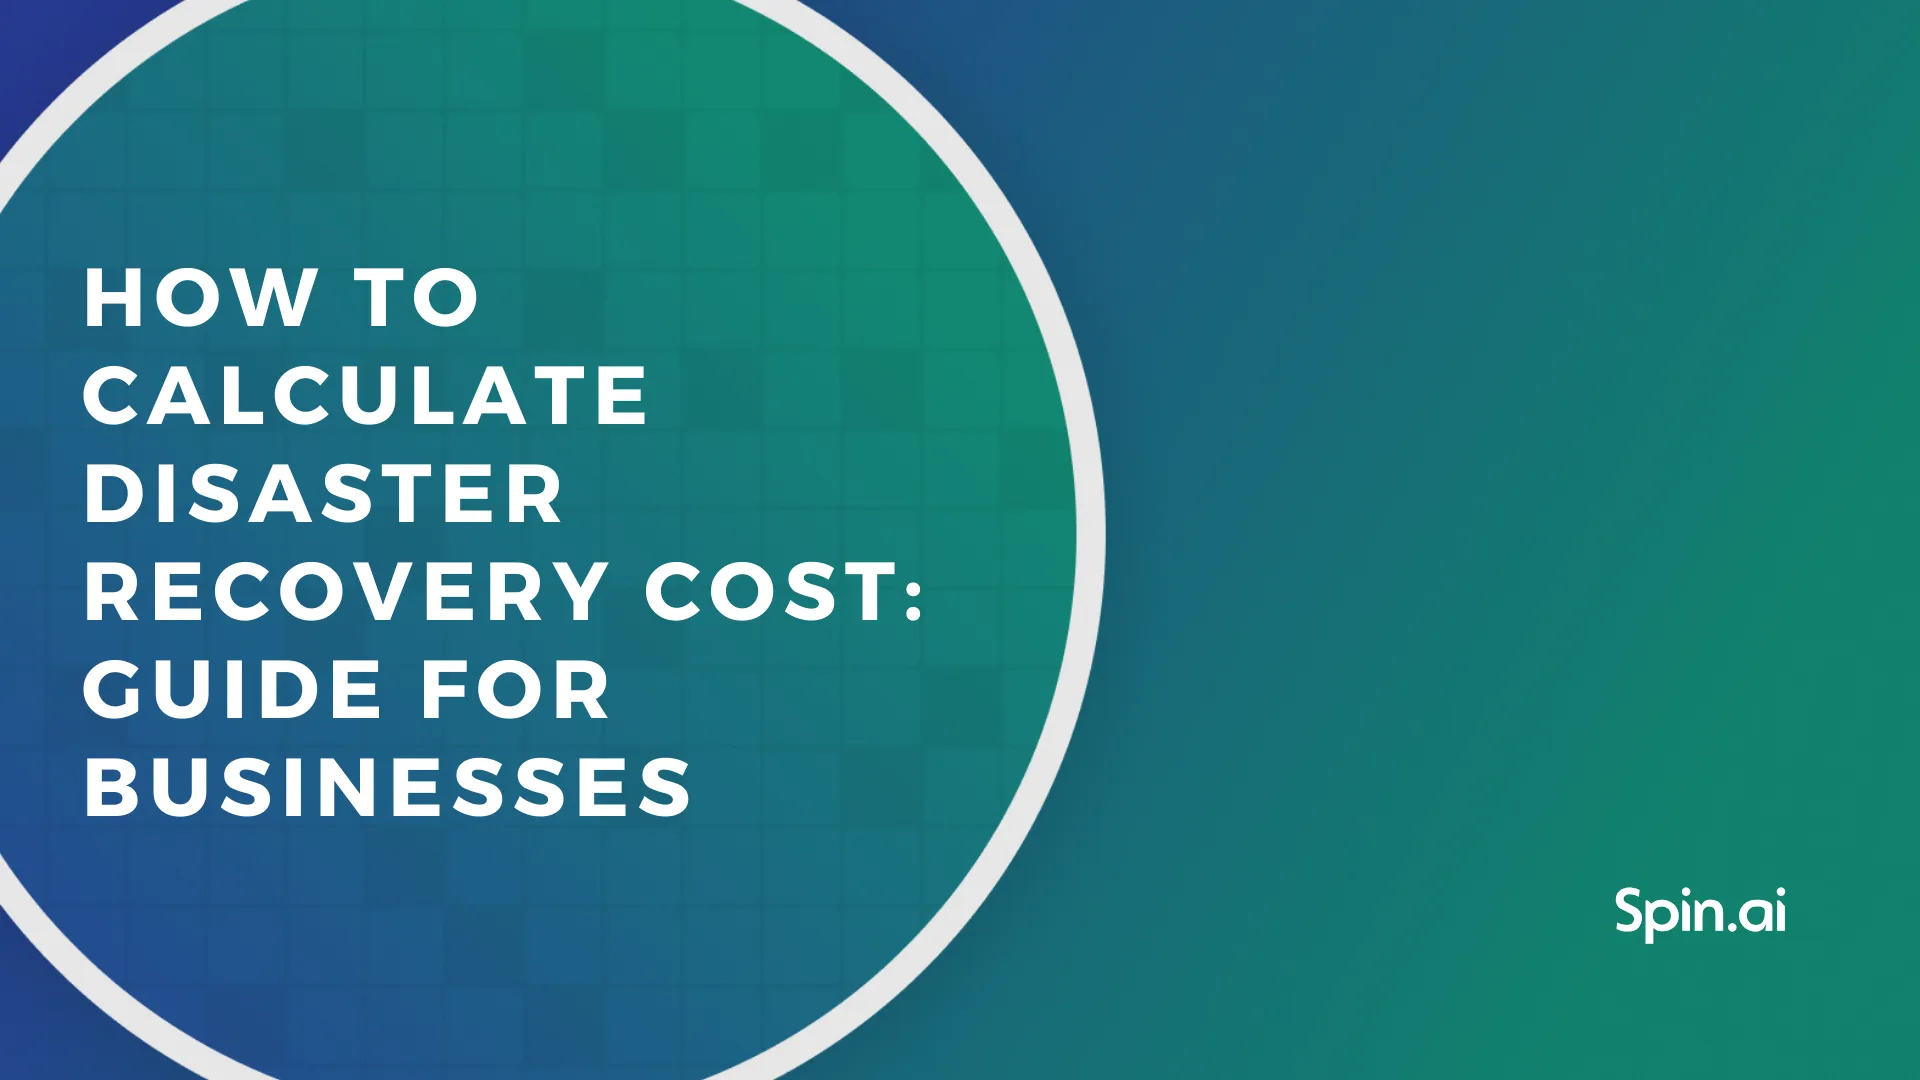 How to Calculate Disaster Recovery Cost Guide for Businesses How to Calculate Disaster Recovery Cost Guide for Business